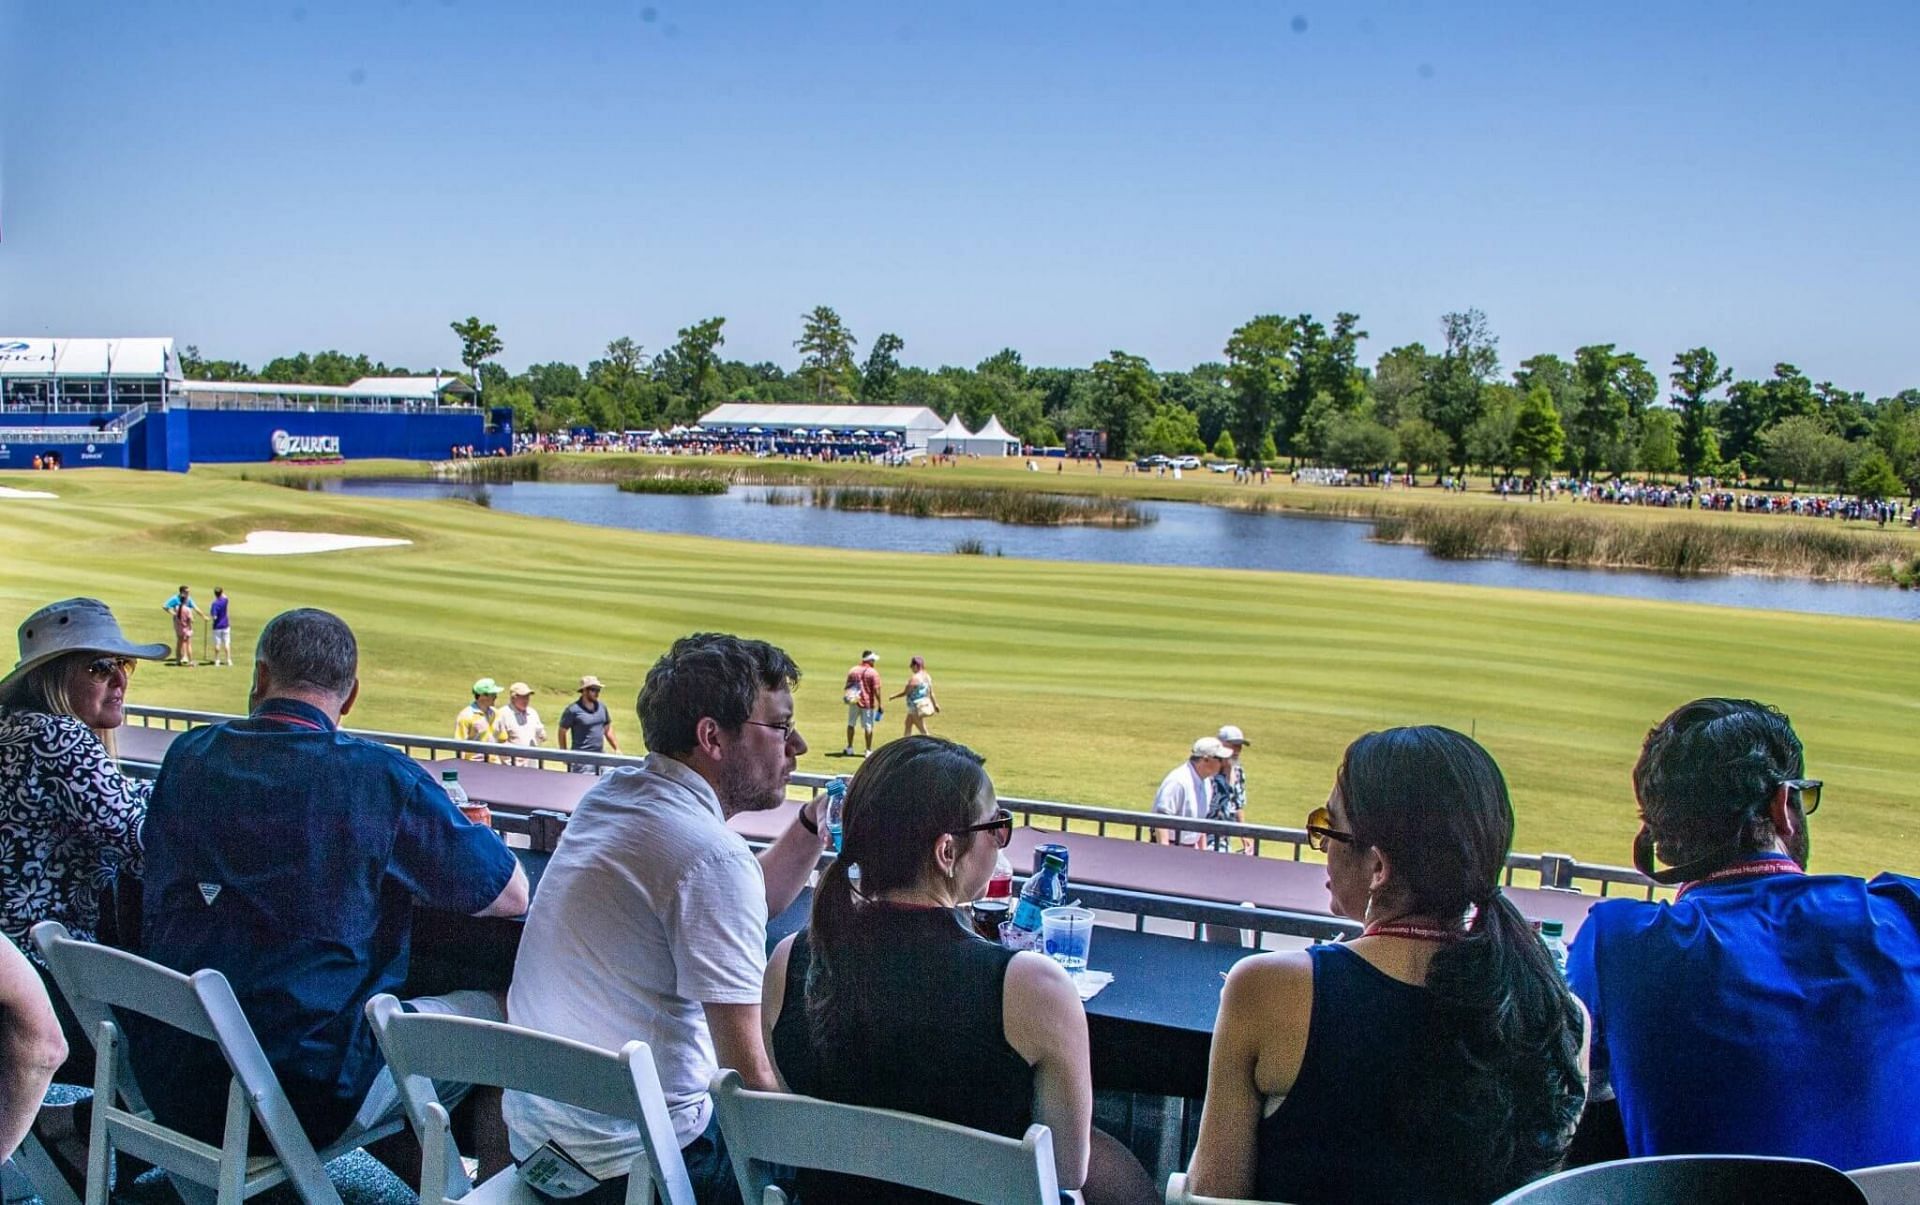 2023 Zurich Classic (Image via Zurich Classic of New Orleans)